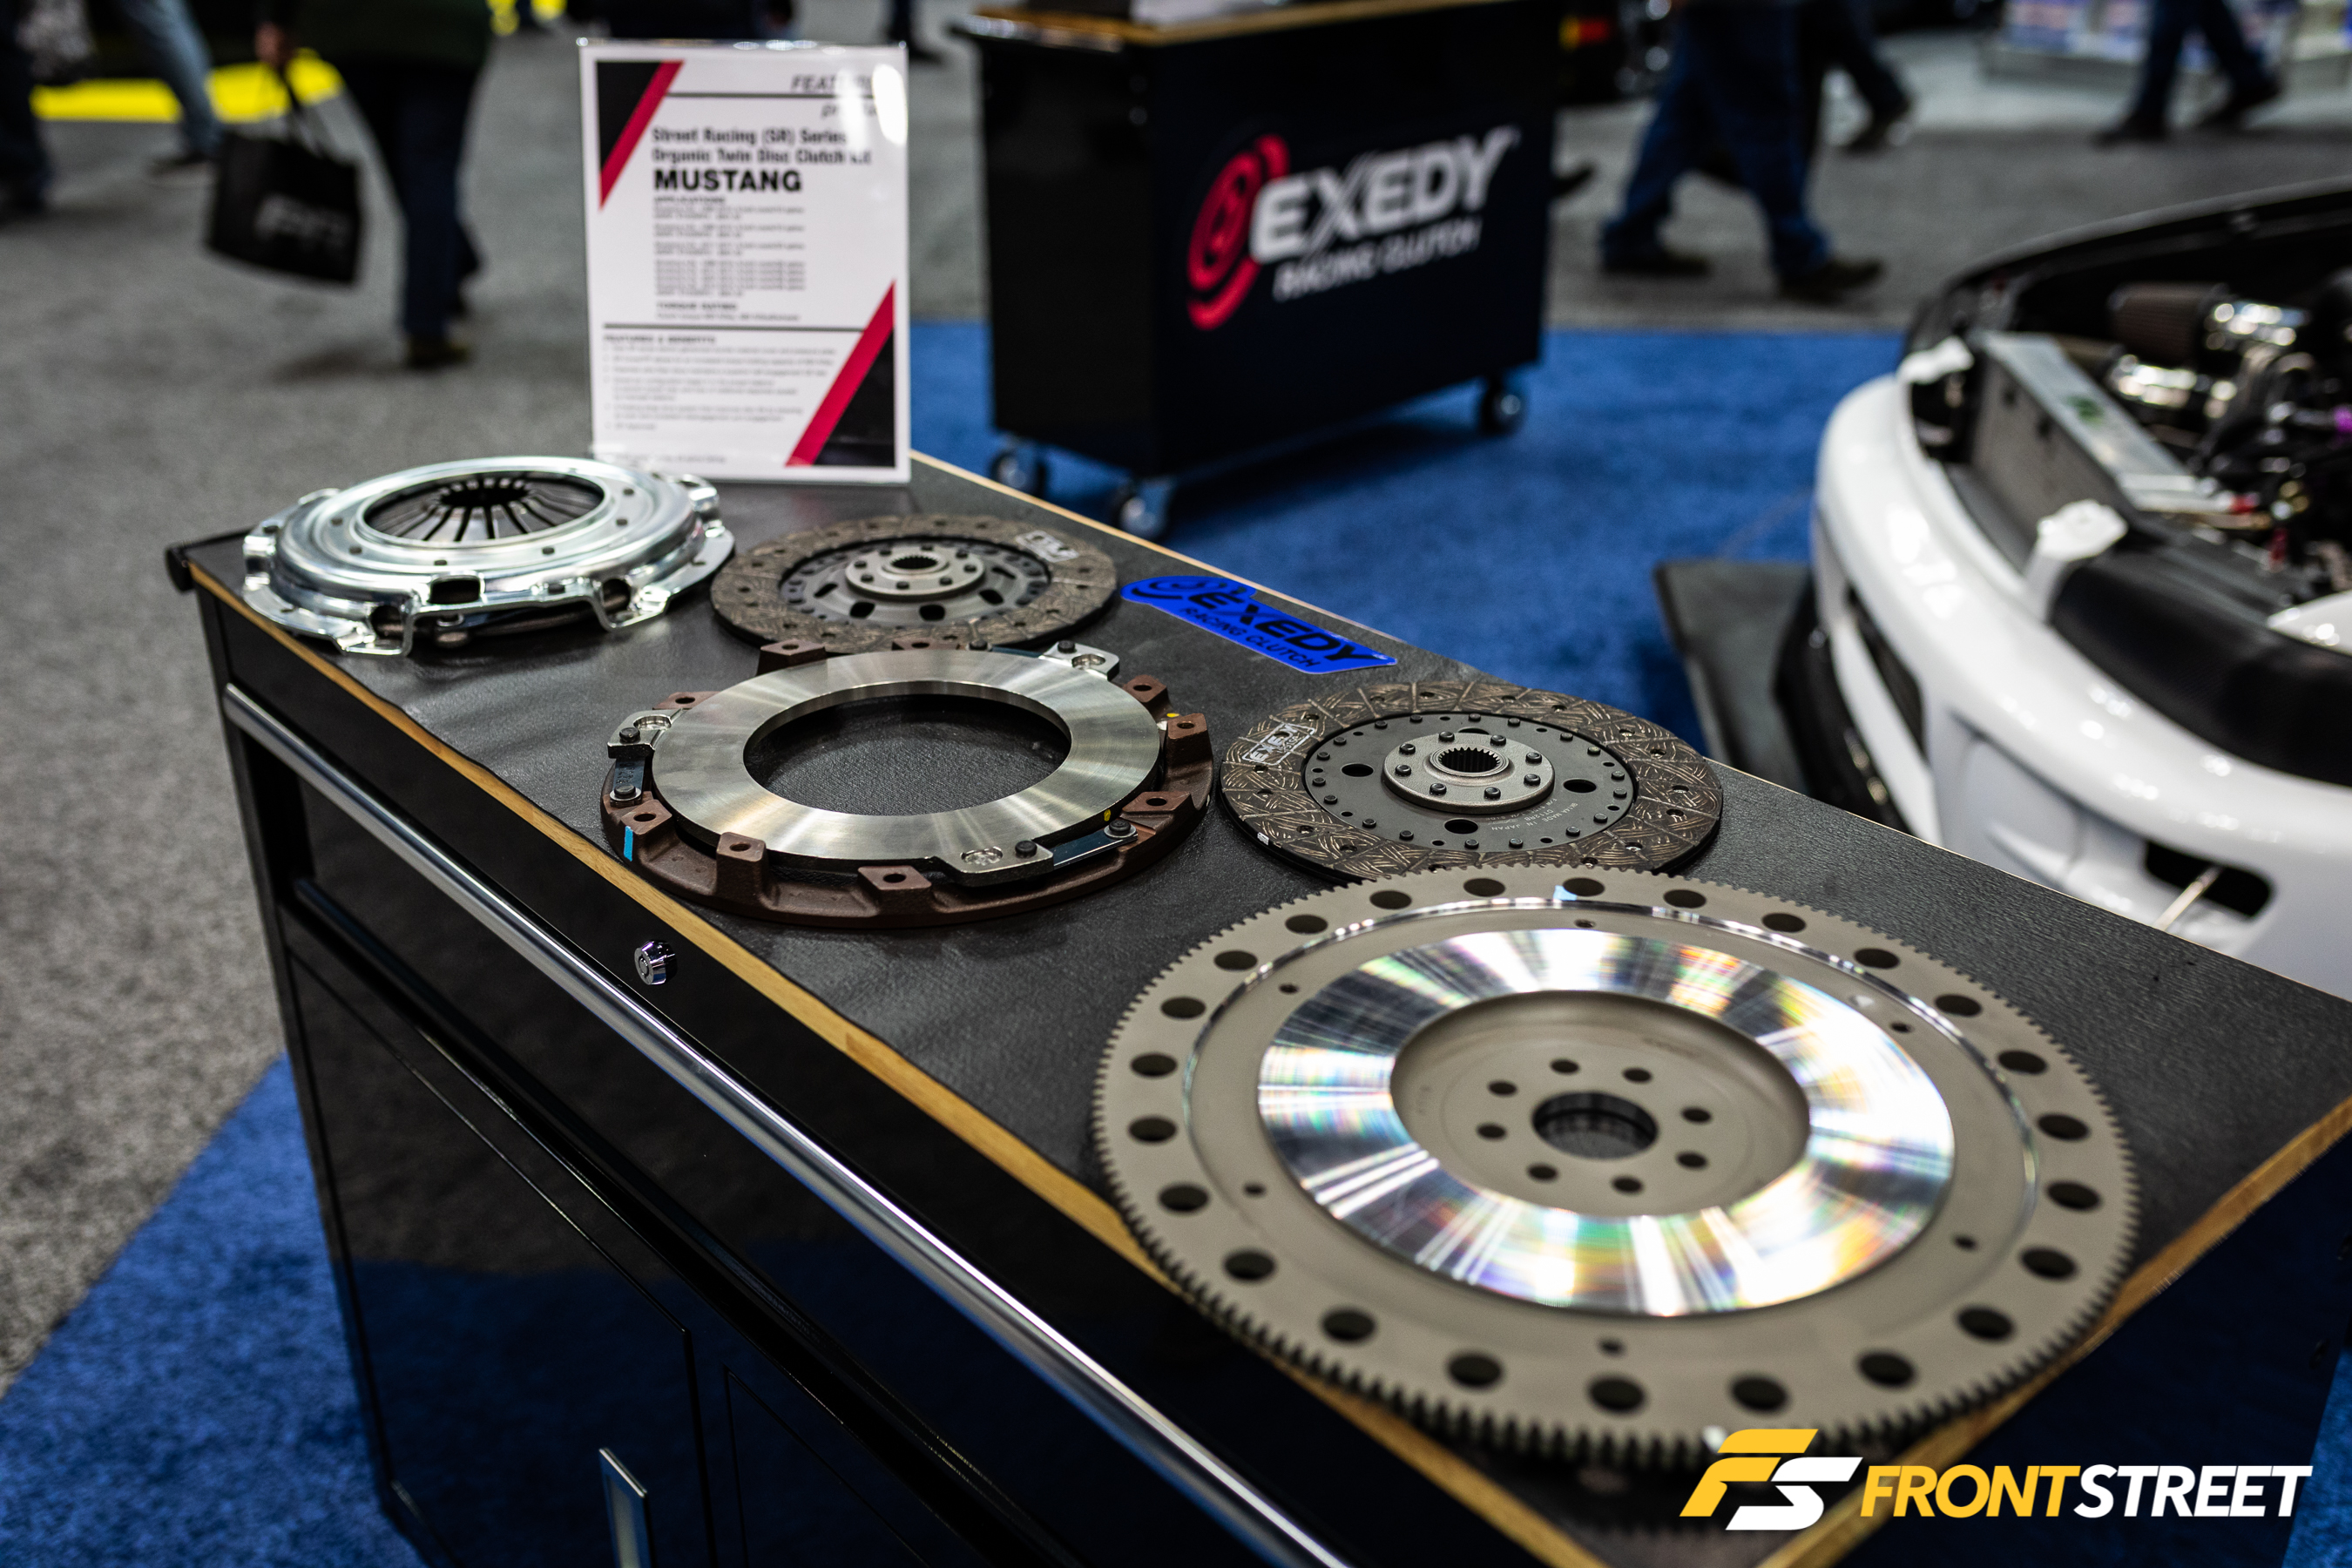 The 2019 Performance Racing Industry Show Ushers In New Trends